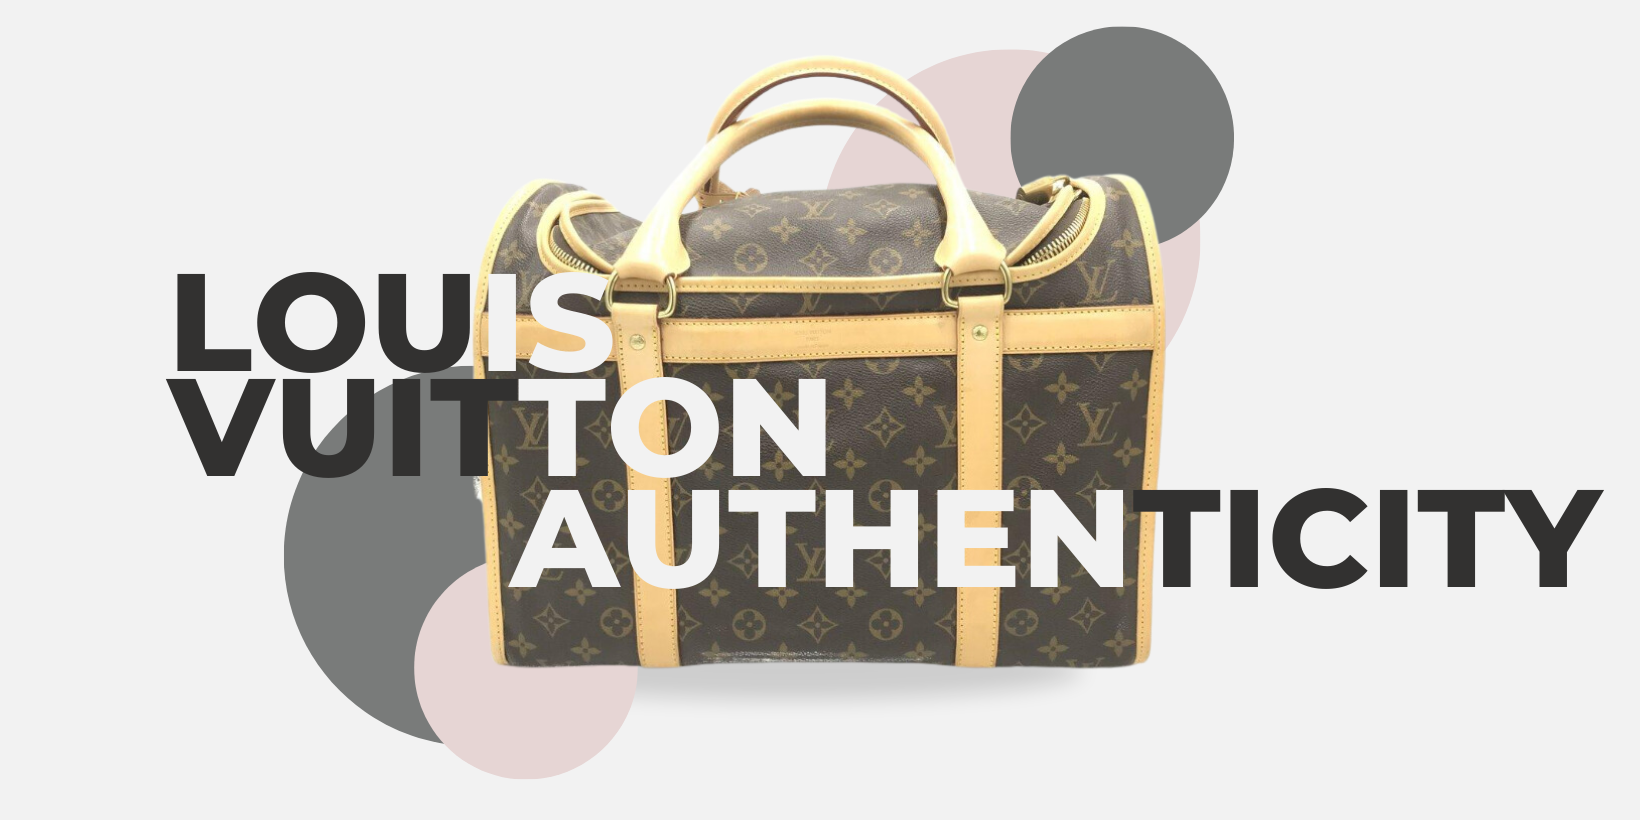 How to Spot Authentic Louis Vuitton: Key Indicators to Look For